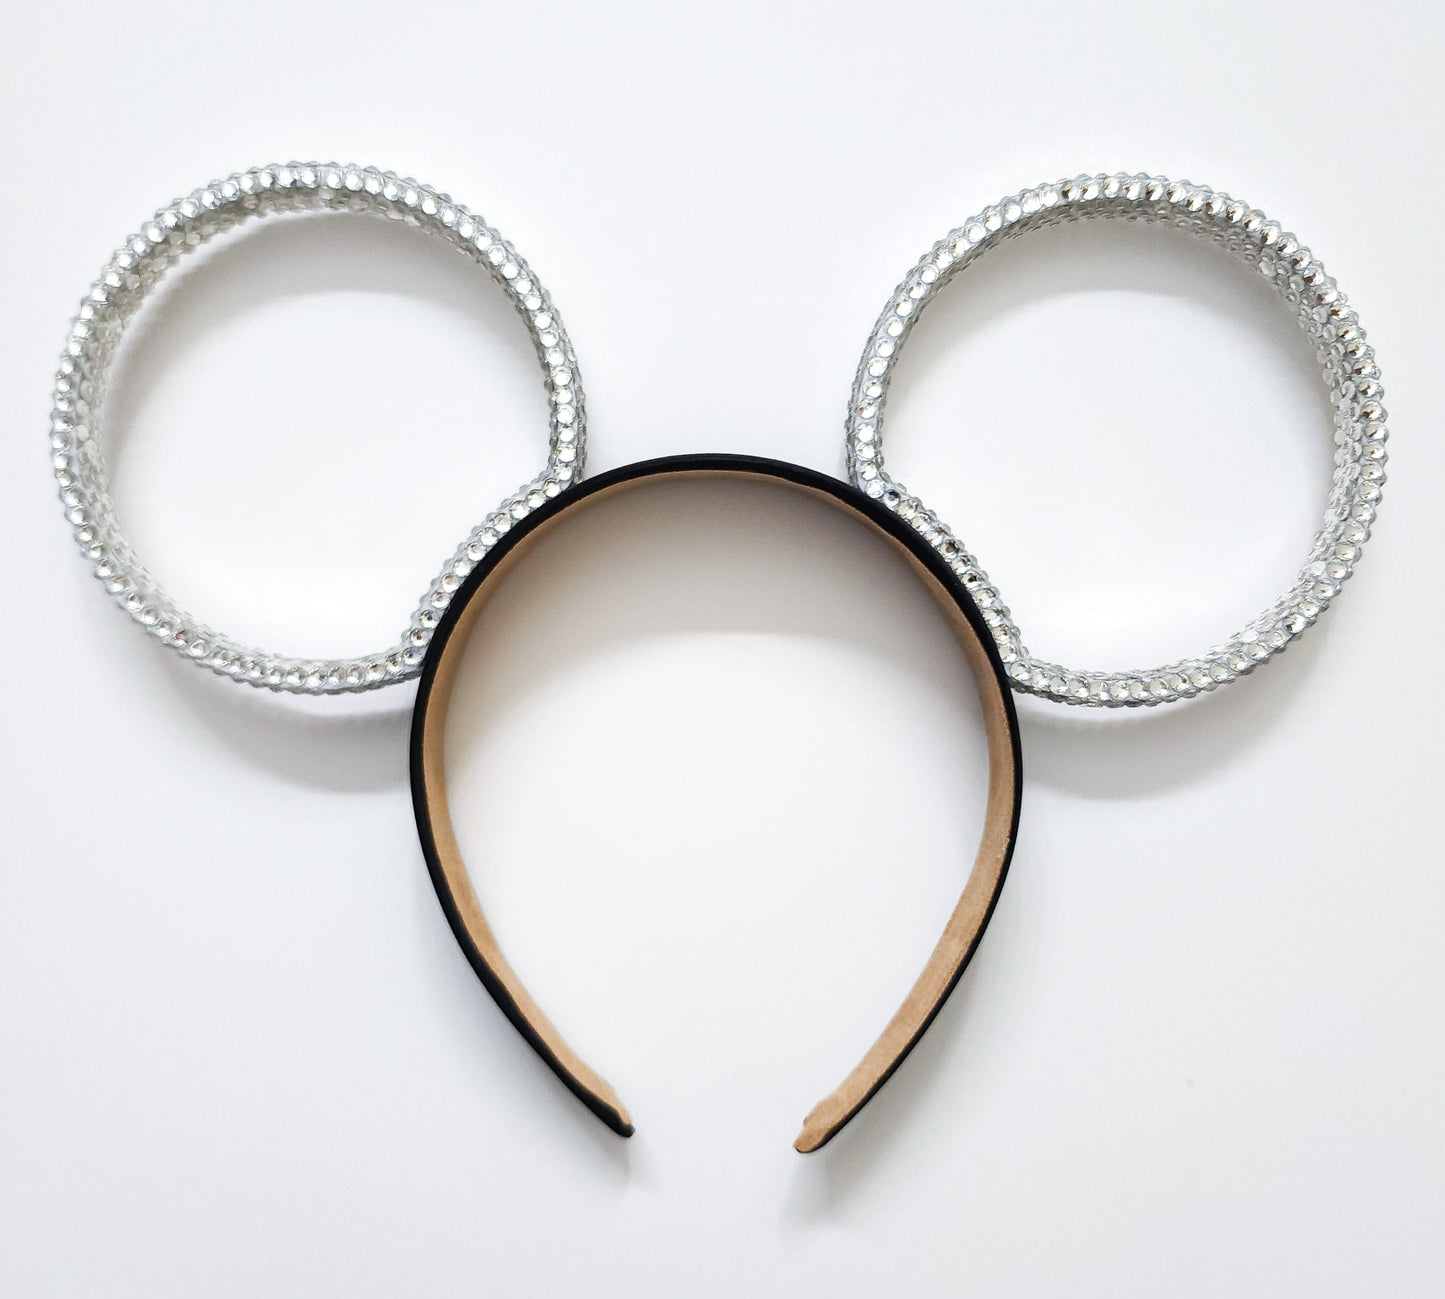 Magic Mountain ears ORIGINAL design-white CLEAR Rhinestone rings 3D Mouse Ears all sides covered with high quality rhinestones